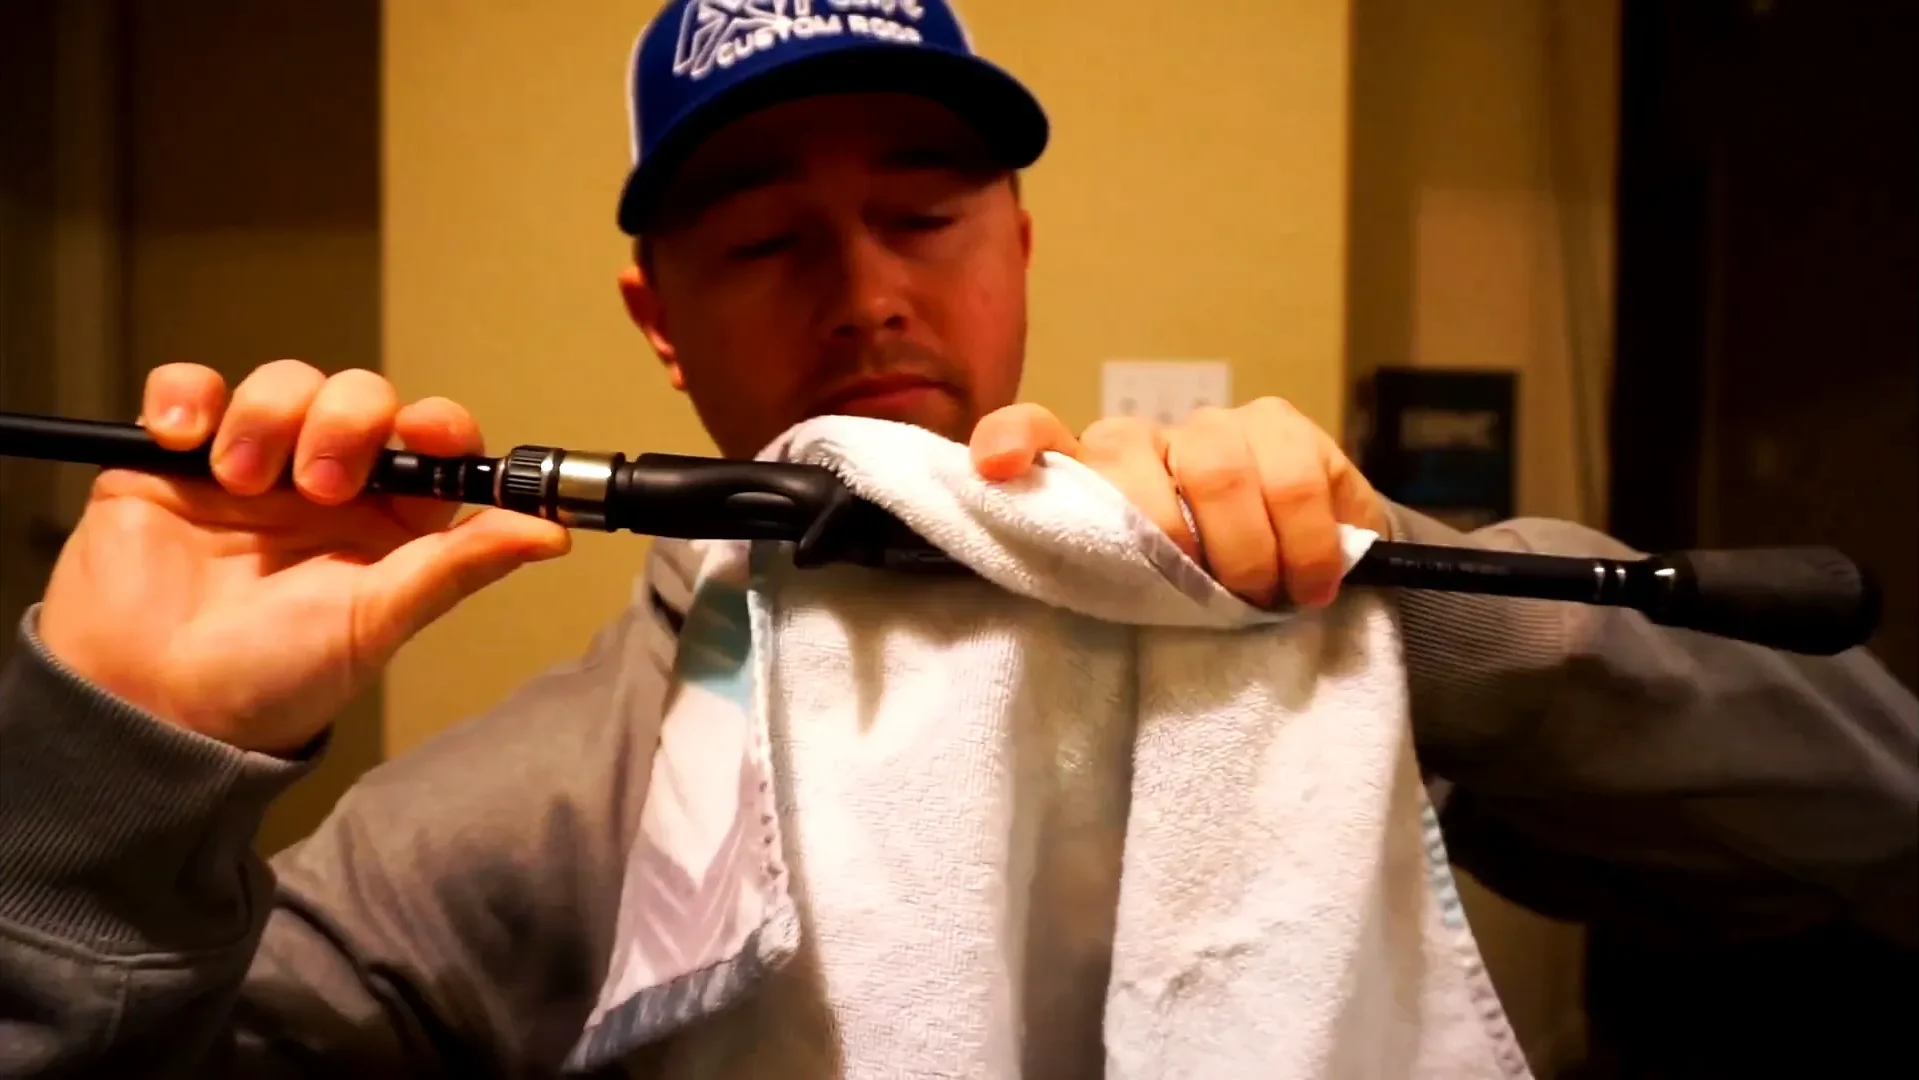 step 4 start clean rod with clean soft towel